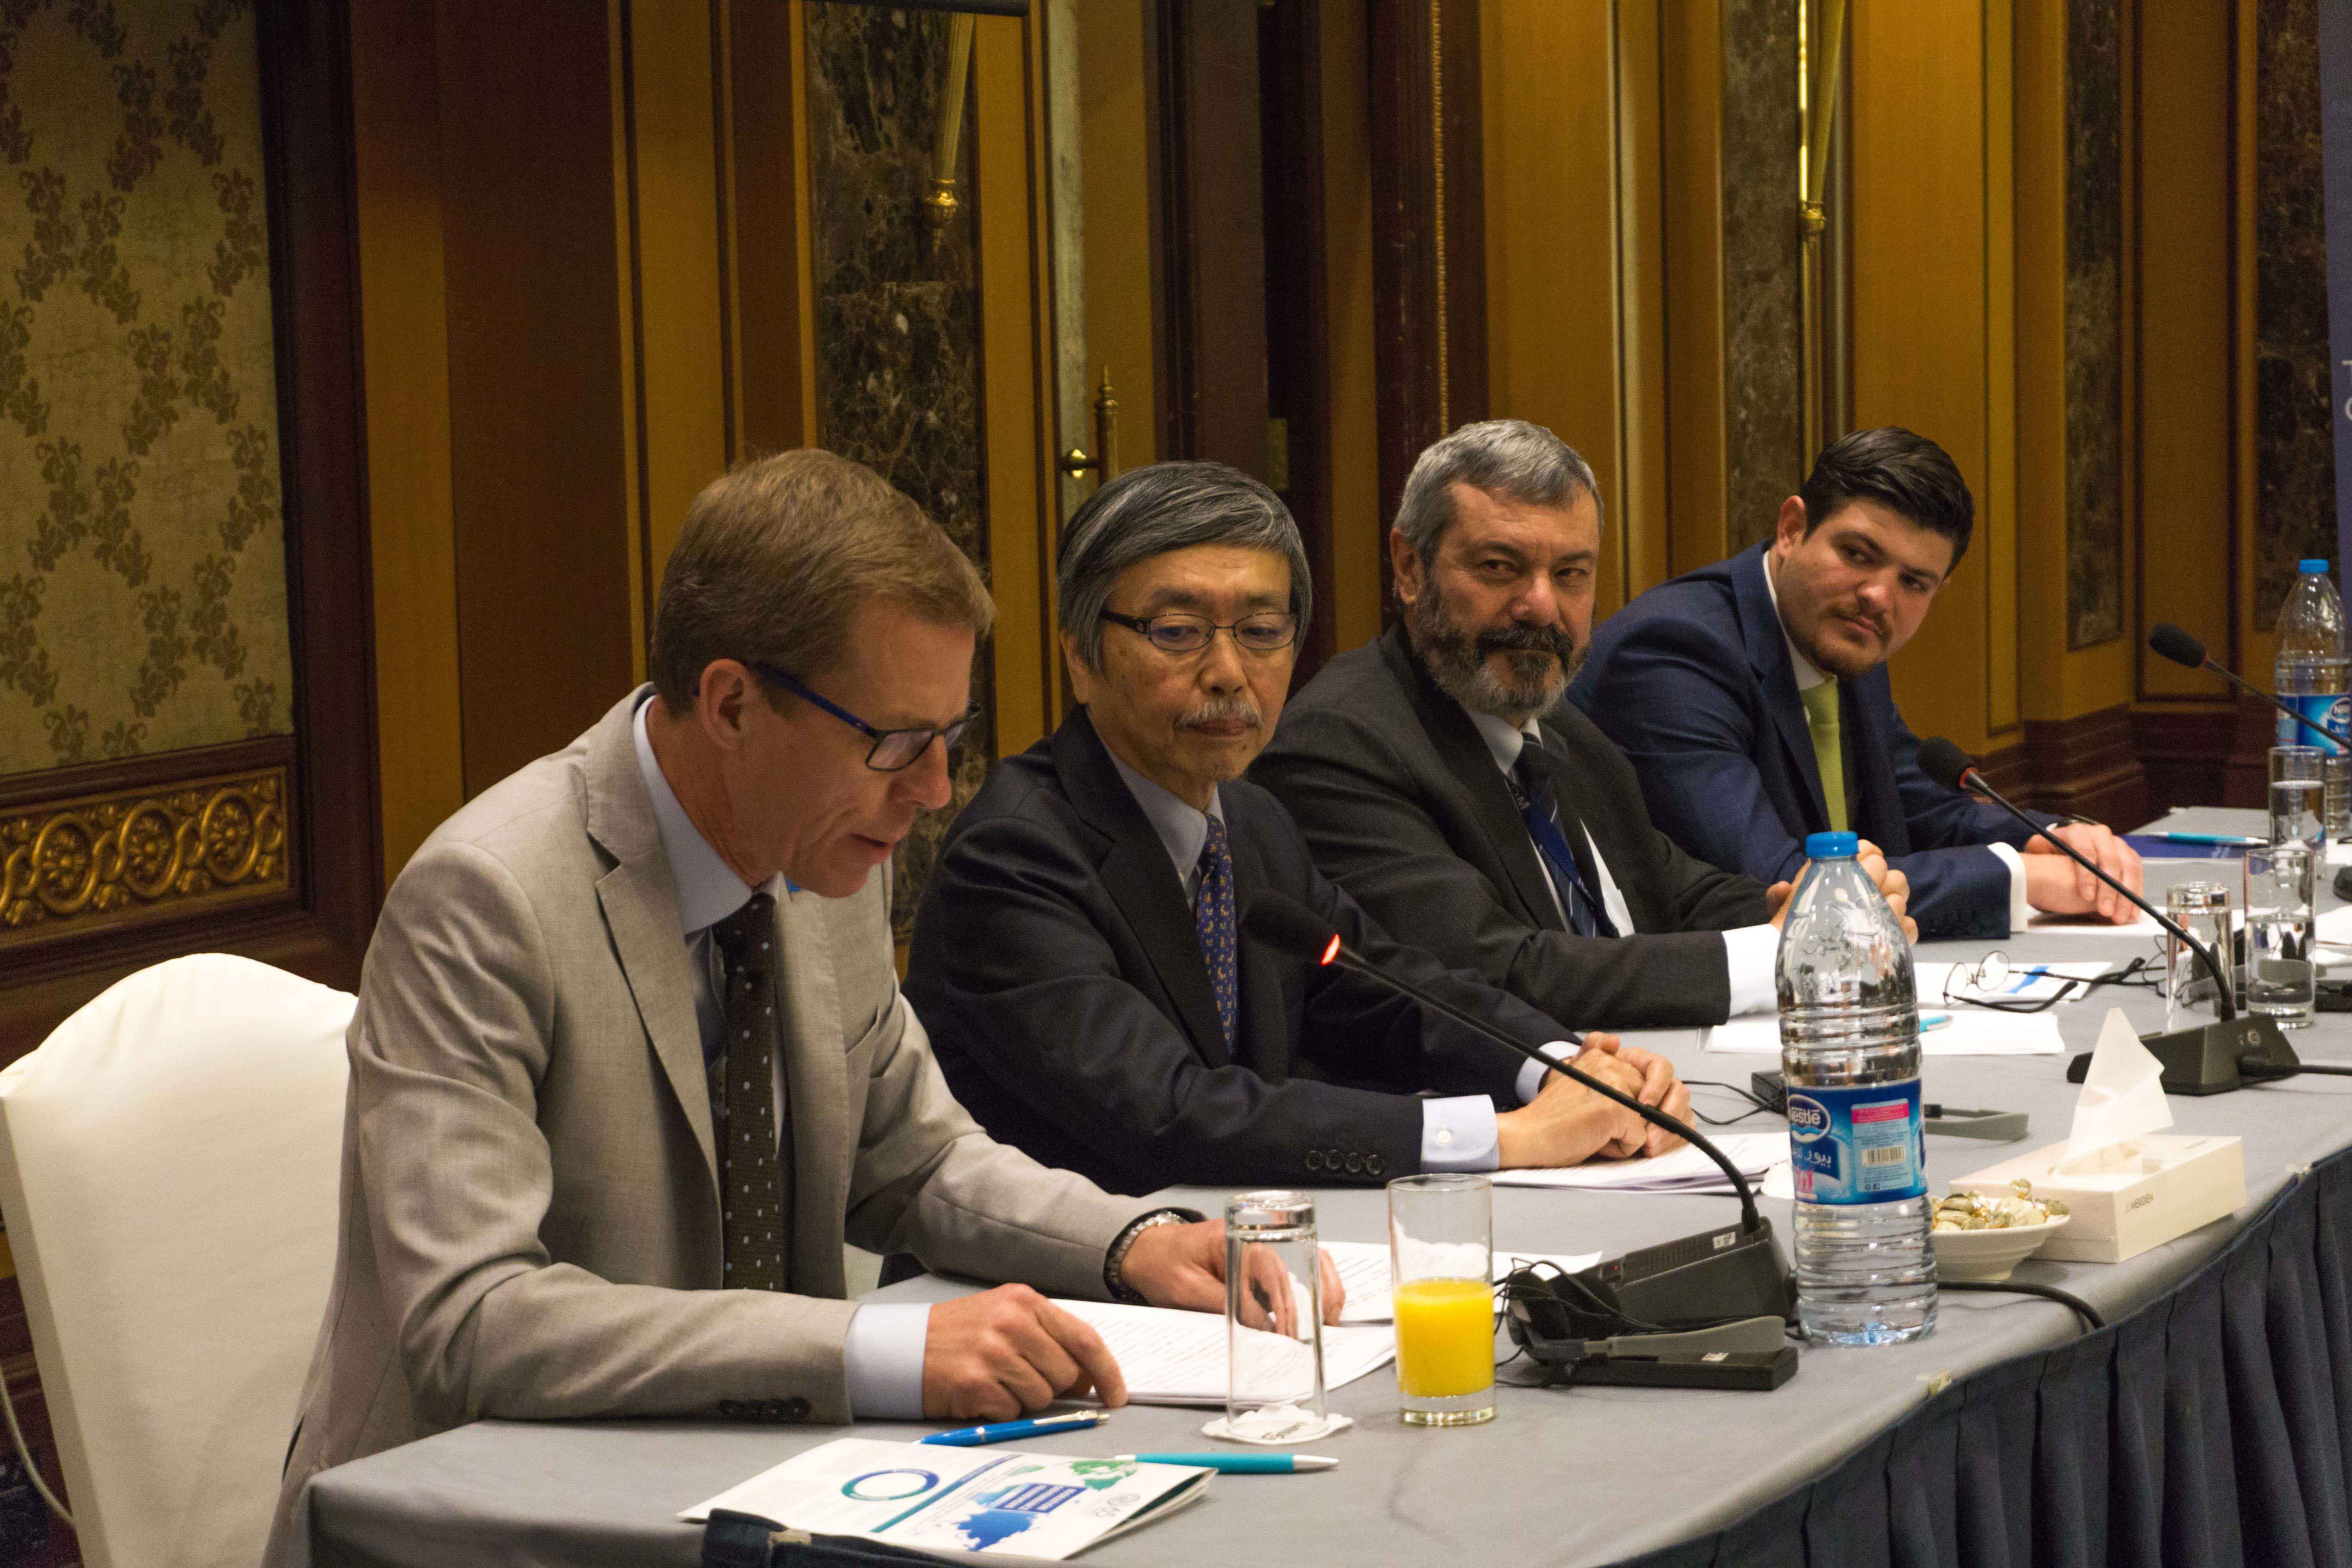 A roundtable discussion with Ambassador of Japan, Ministry of Foreign Affairs and Expatriates, and other UN representatives